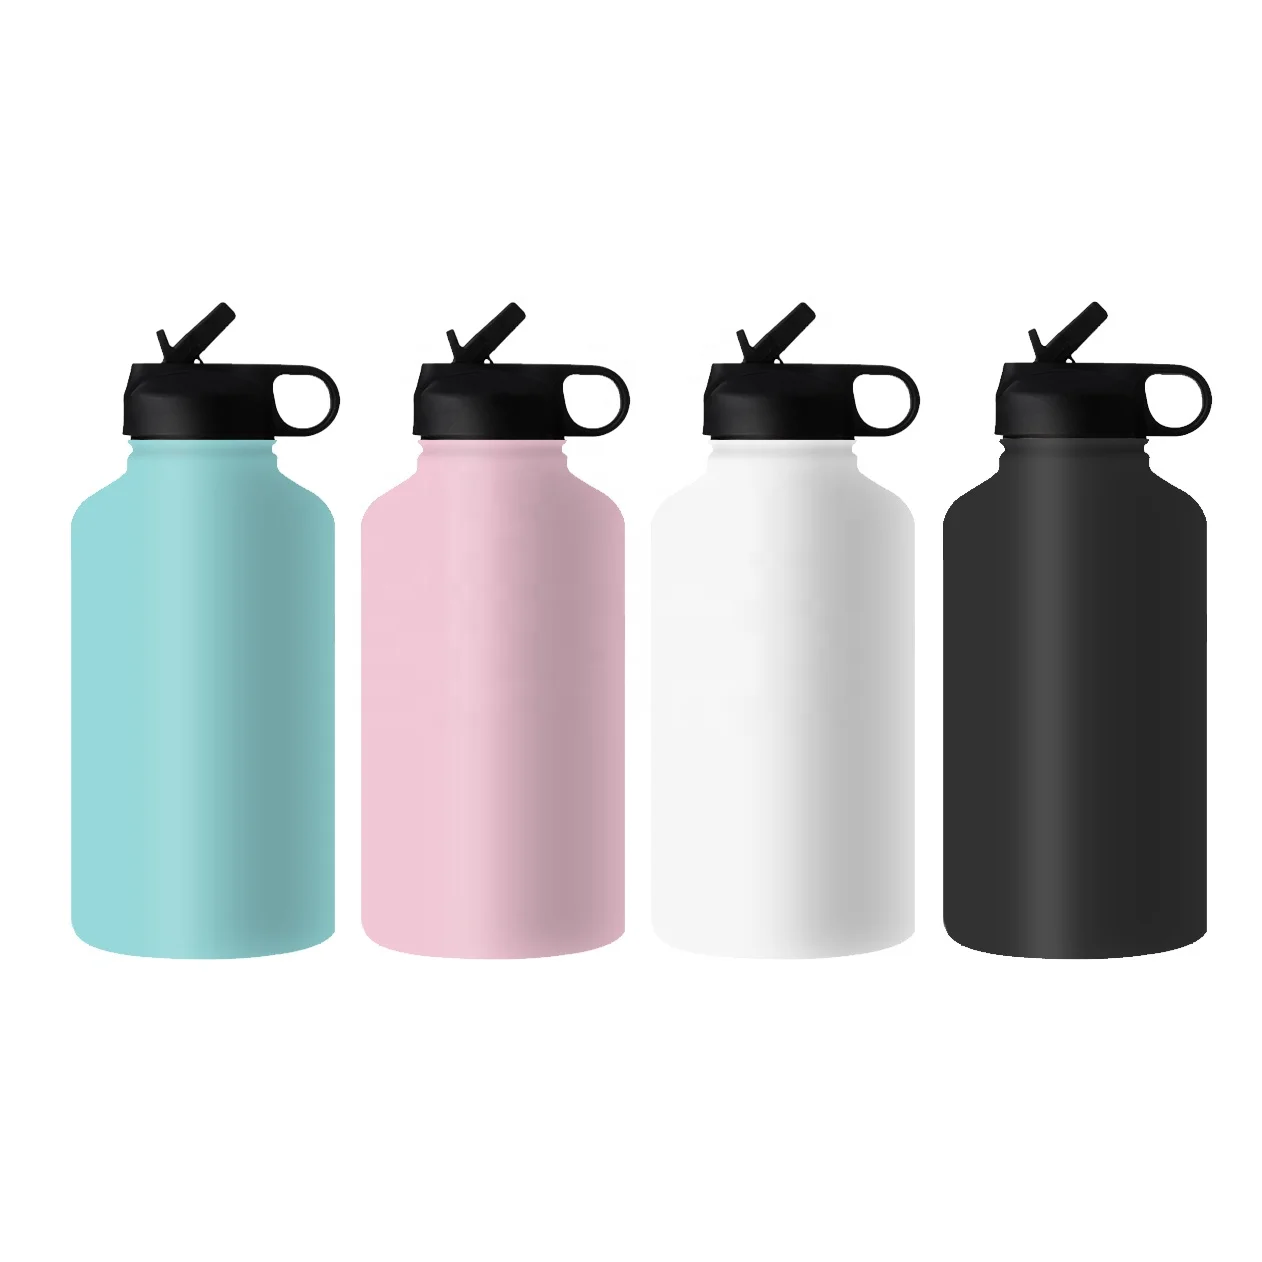 

64oz Double Wall Stainless Steel Vacuum Thermo Flask Insulated Water Bottle, White, black, pink, mint green or customized